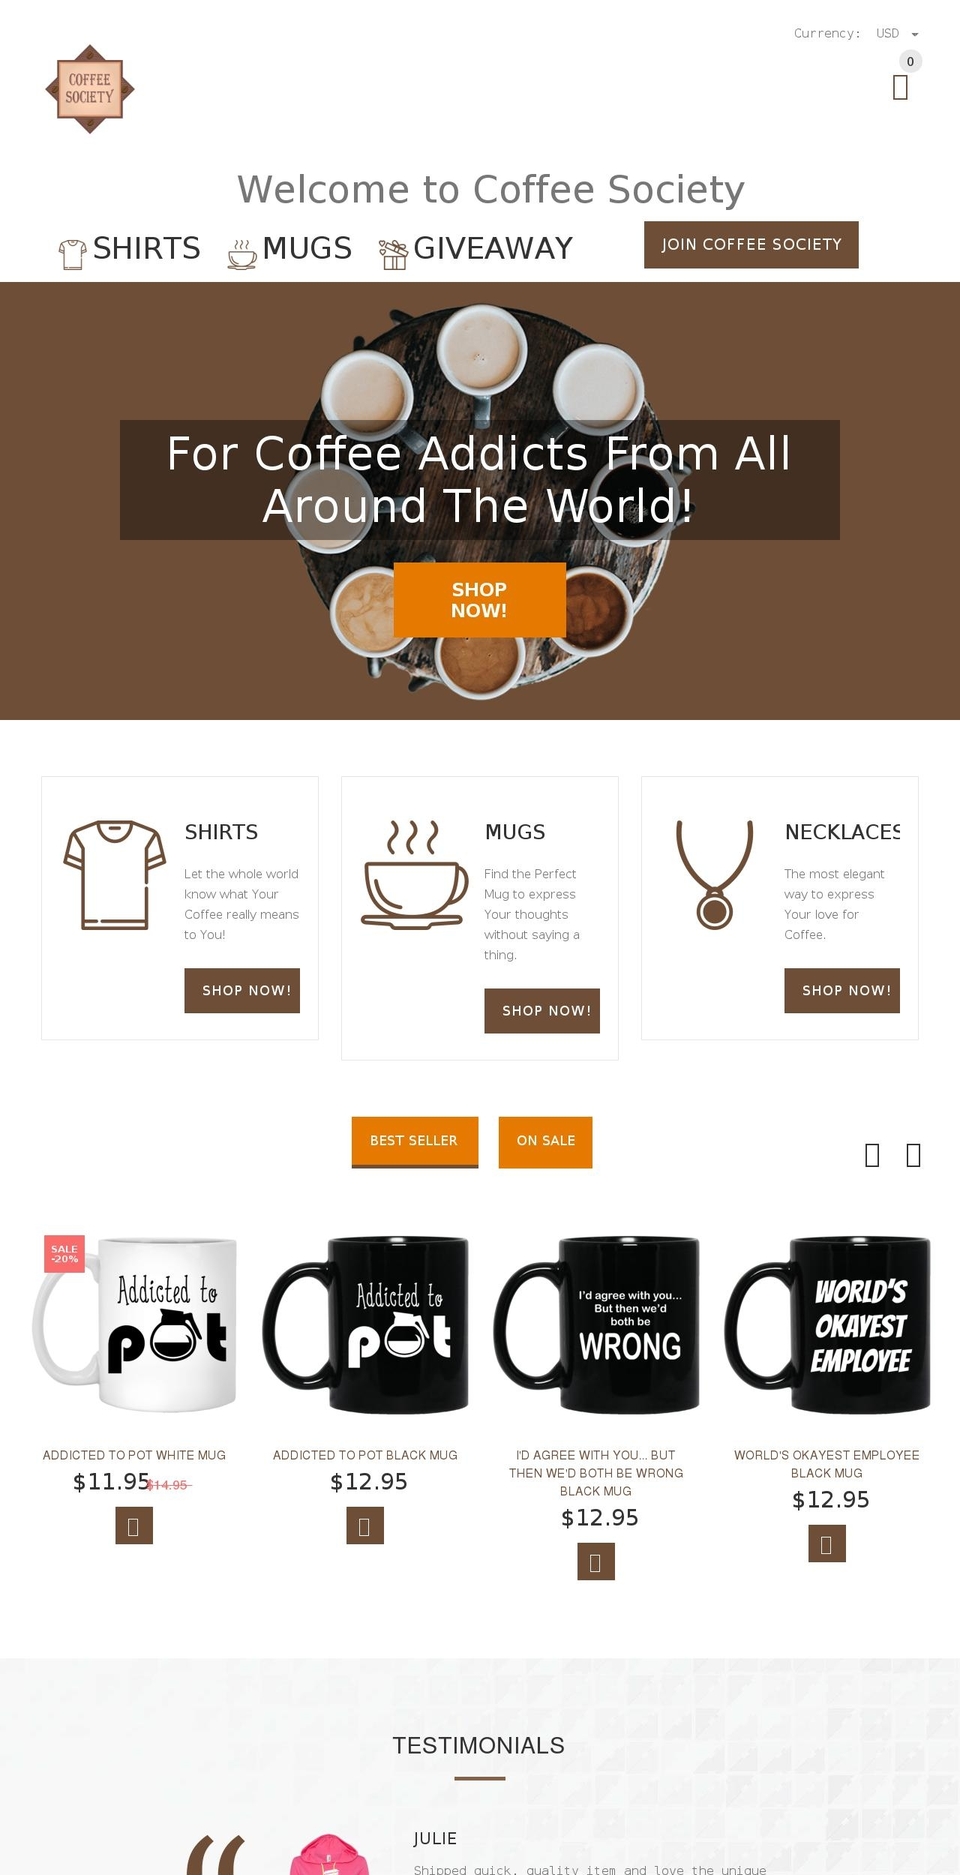 install-me-yourstore-v2-1-7 Shopify theme site example coffeesociety.net